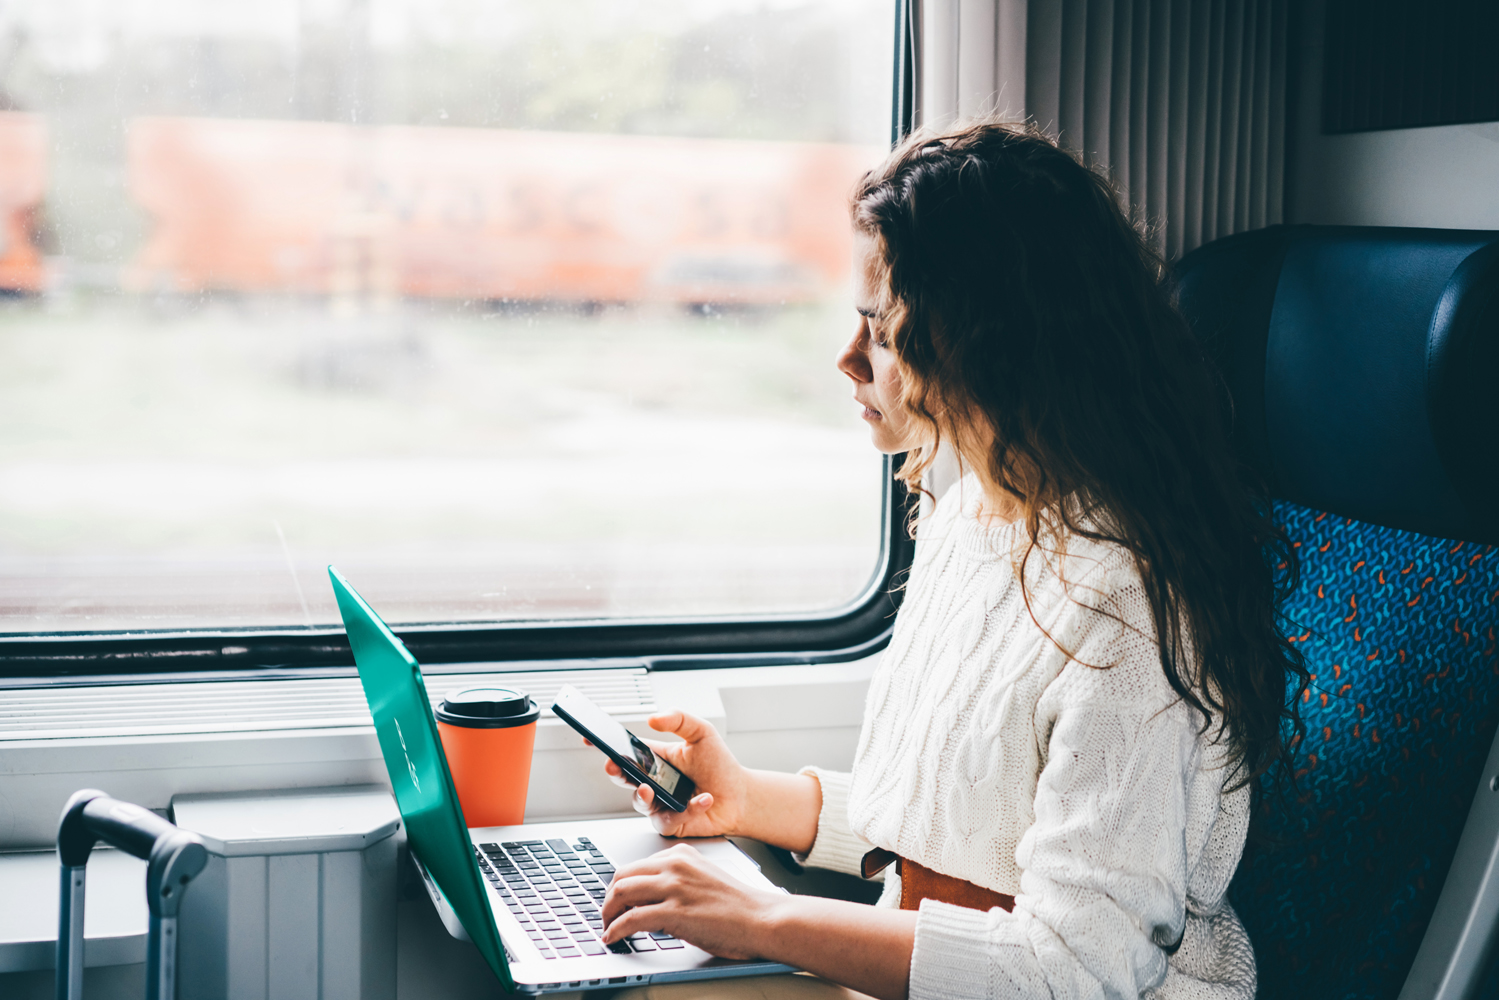 Freelancer girl working with laptop in the train. Girl looking to the phone in her hand. Business travel or technology concept.